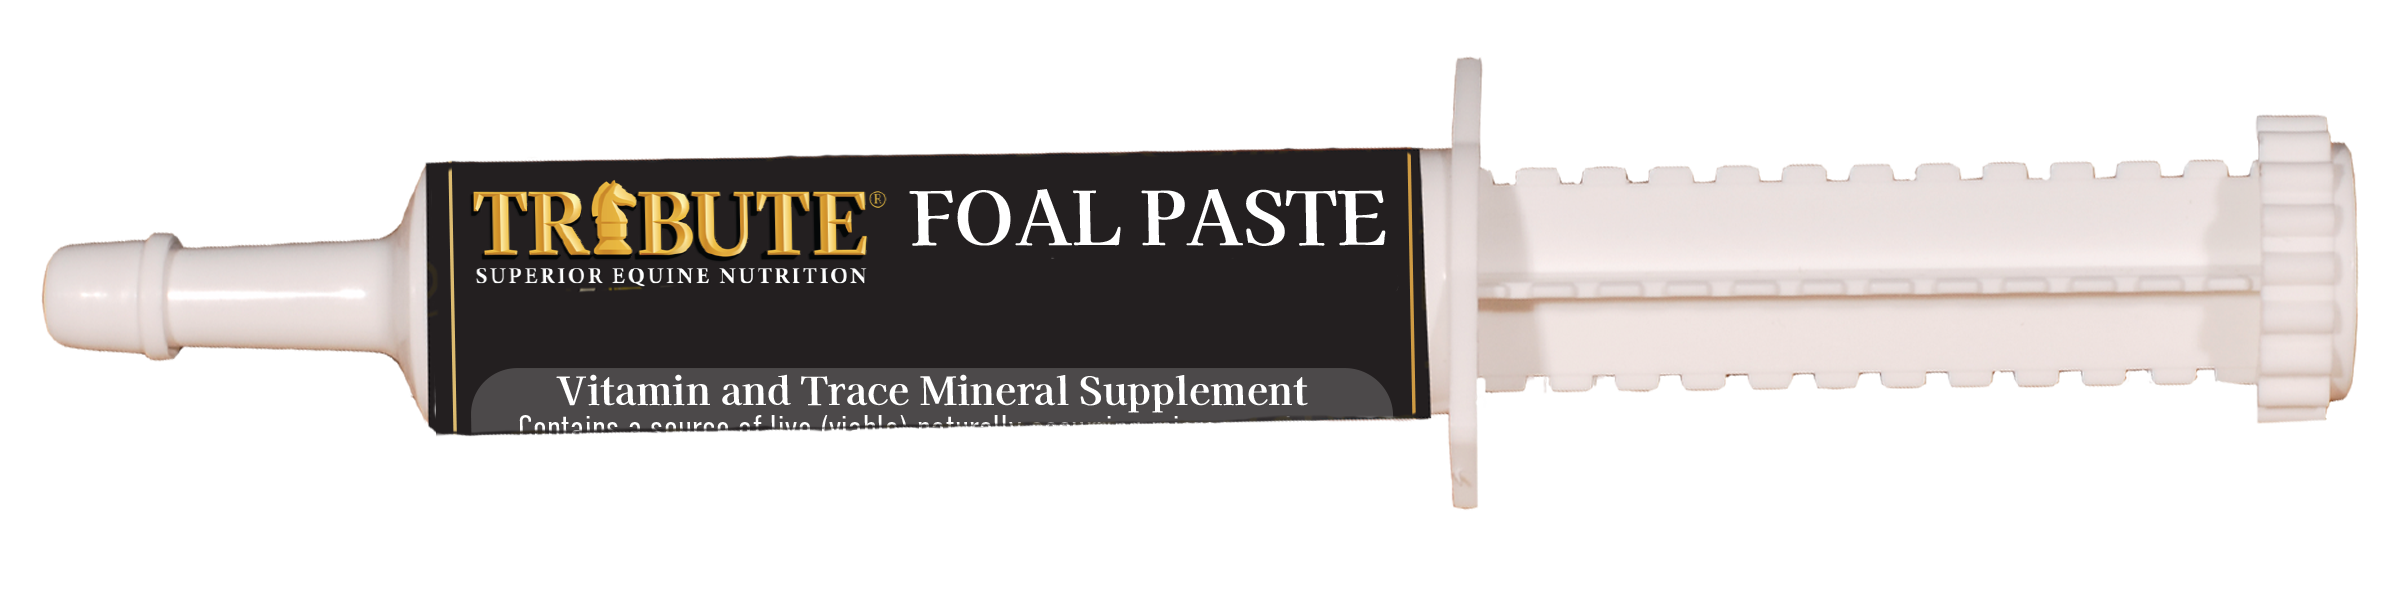 Foal Paste for Horses & Foals – Tribute Equine Nutrition